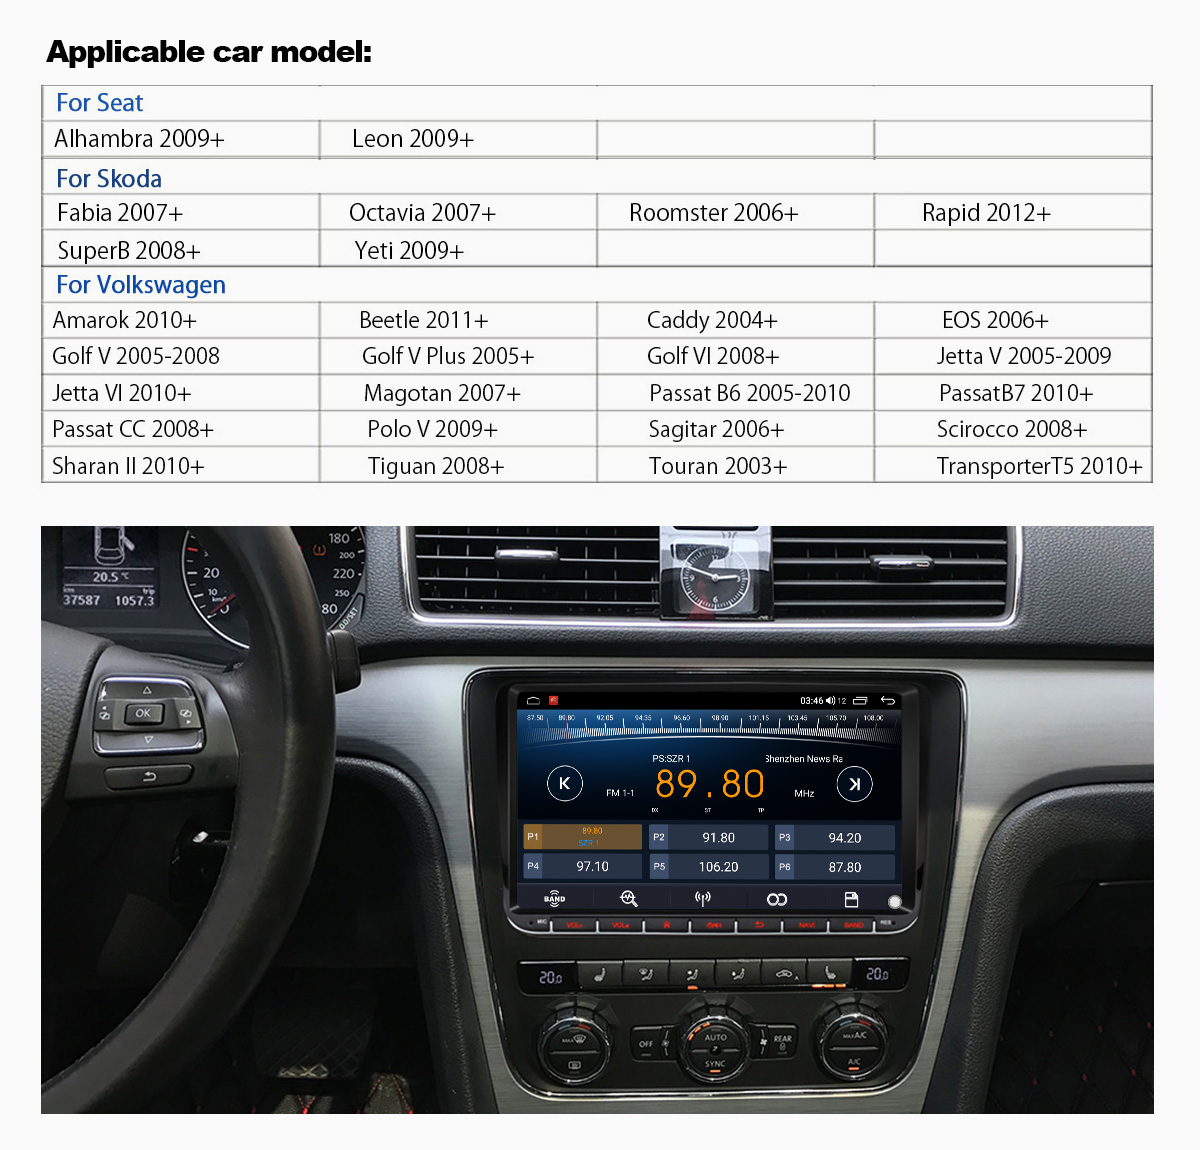  Android 10 VW Head unit 